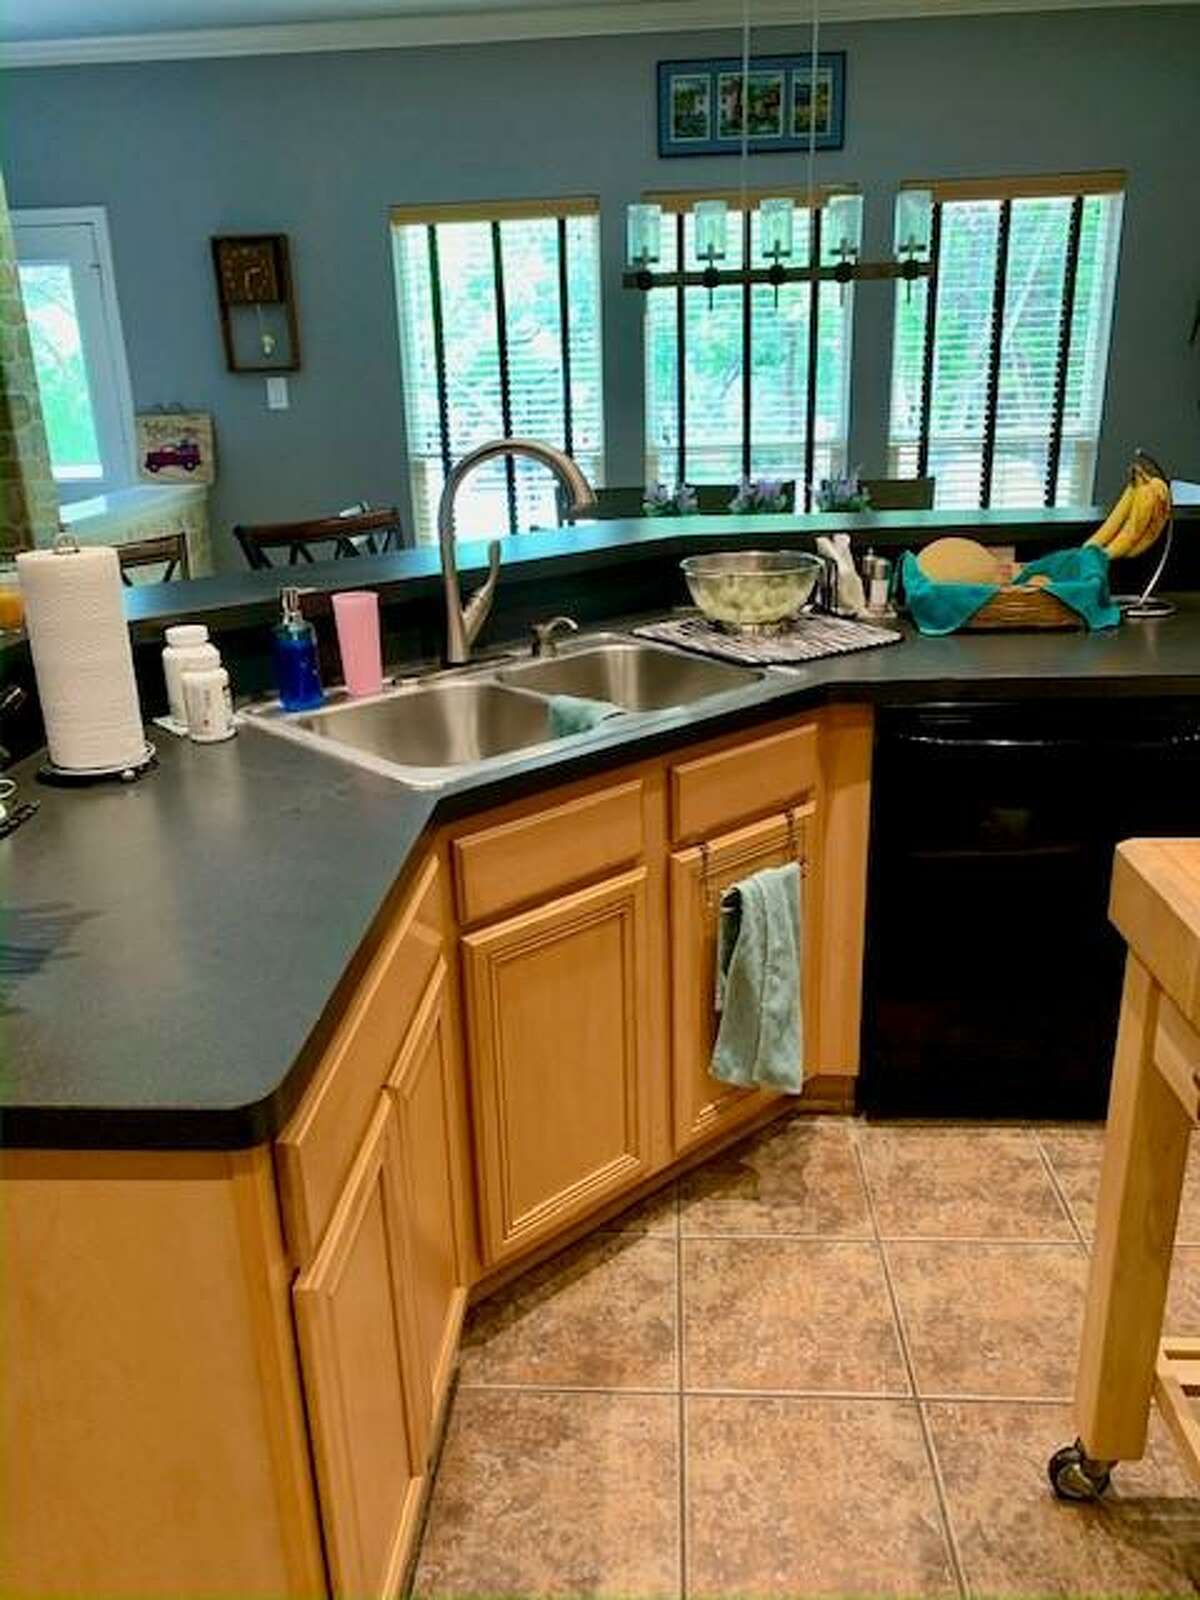 The original center island in Penny and Don Wuebben's Helotes Kitchen wasn’t square or even rectangular. Instead it had several 45-degree angles and the counter along one side was raised 6 inches higher than the rest of it.